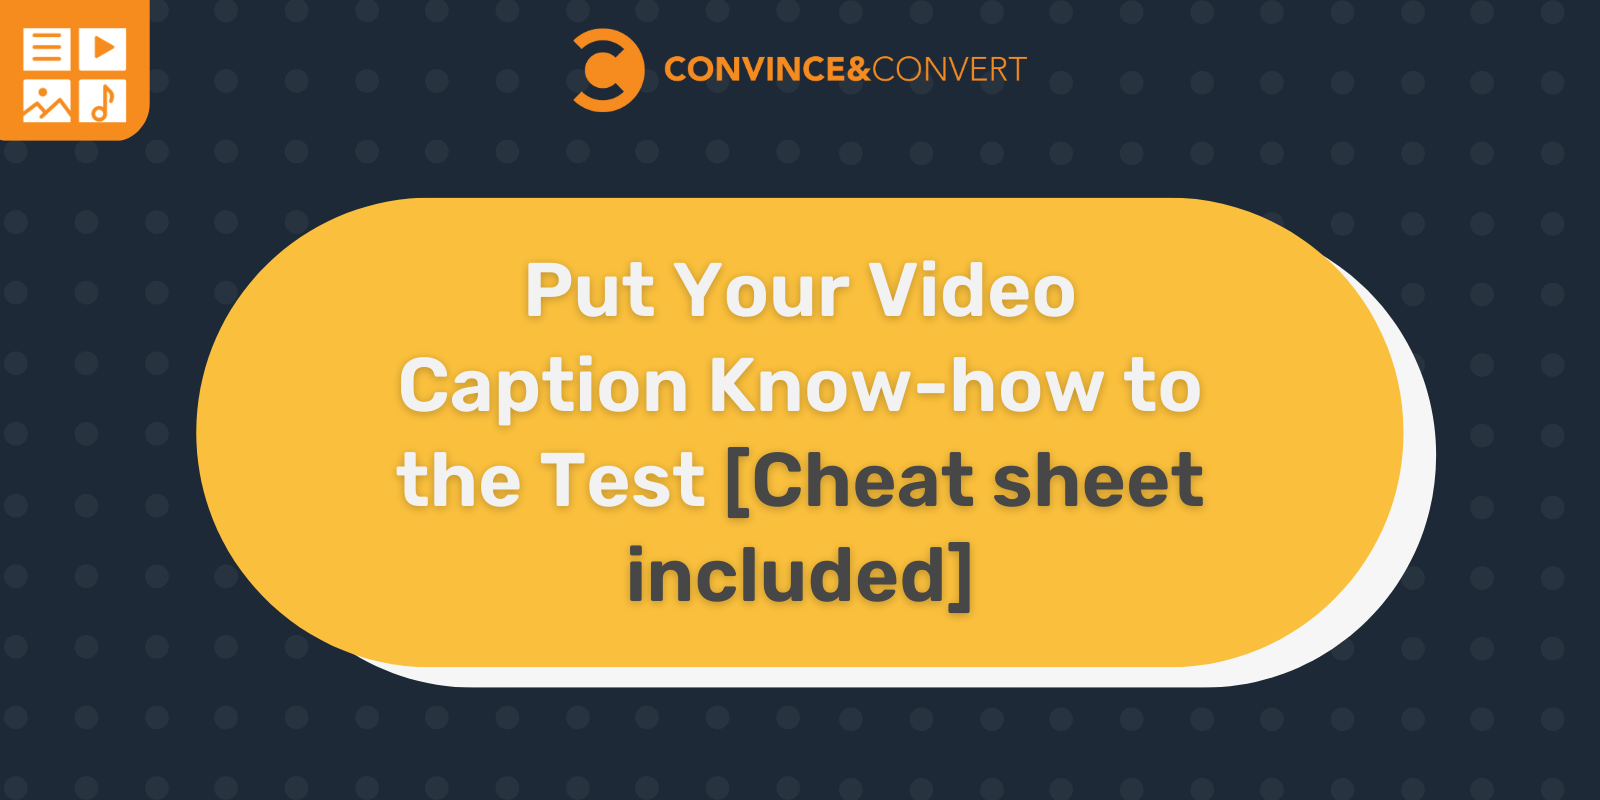 You are currently viewing Put Your Video Caption Know-how to the Test [Cheat sheet included]